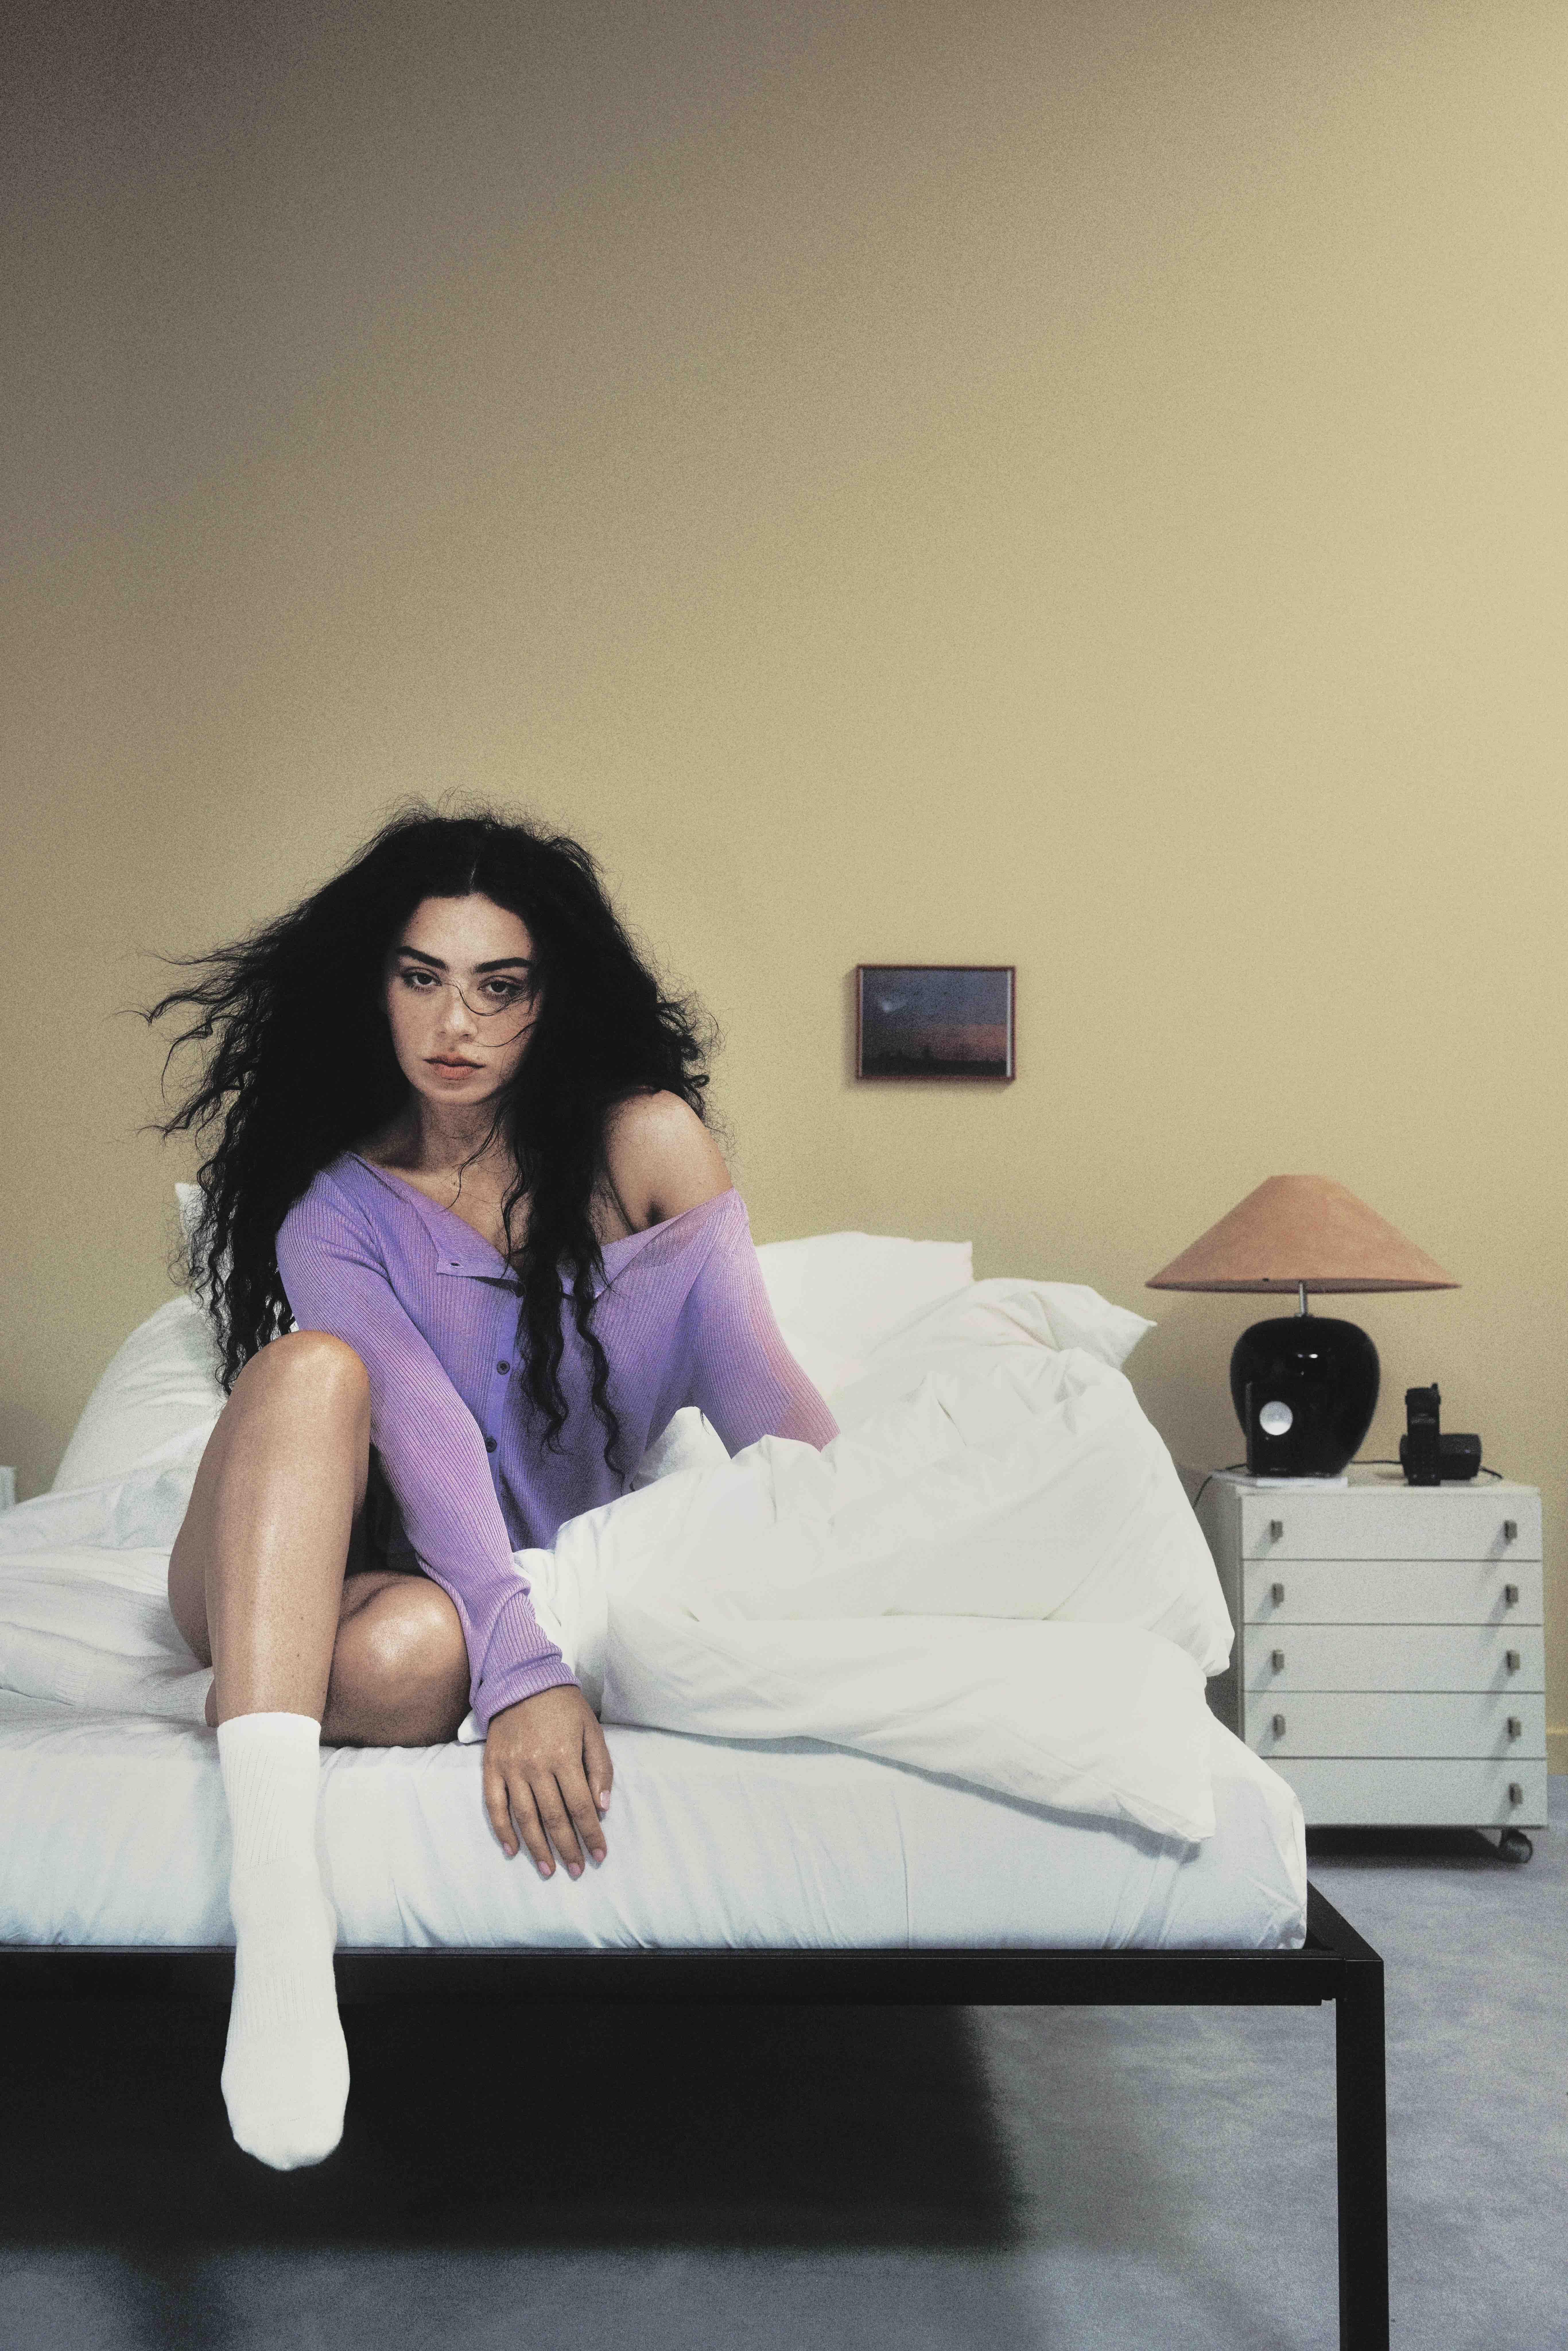 Zalando And Charli XCX Want To Tell You A Story